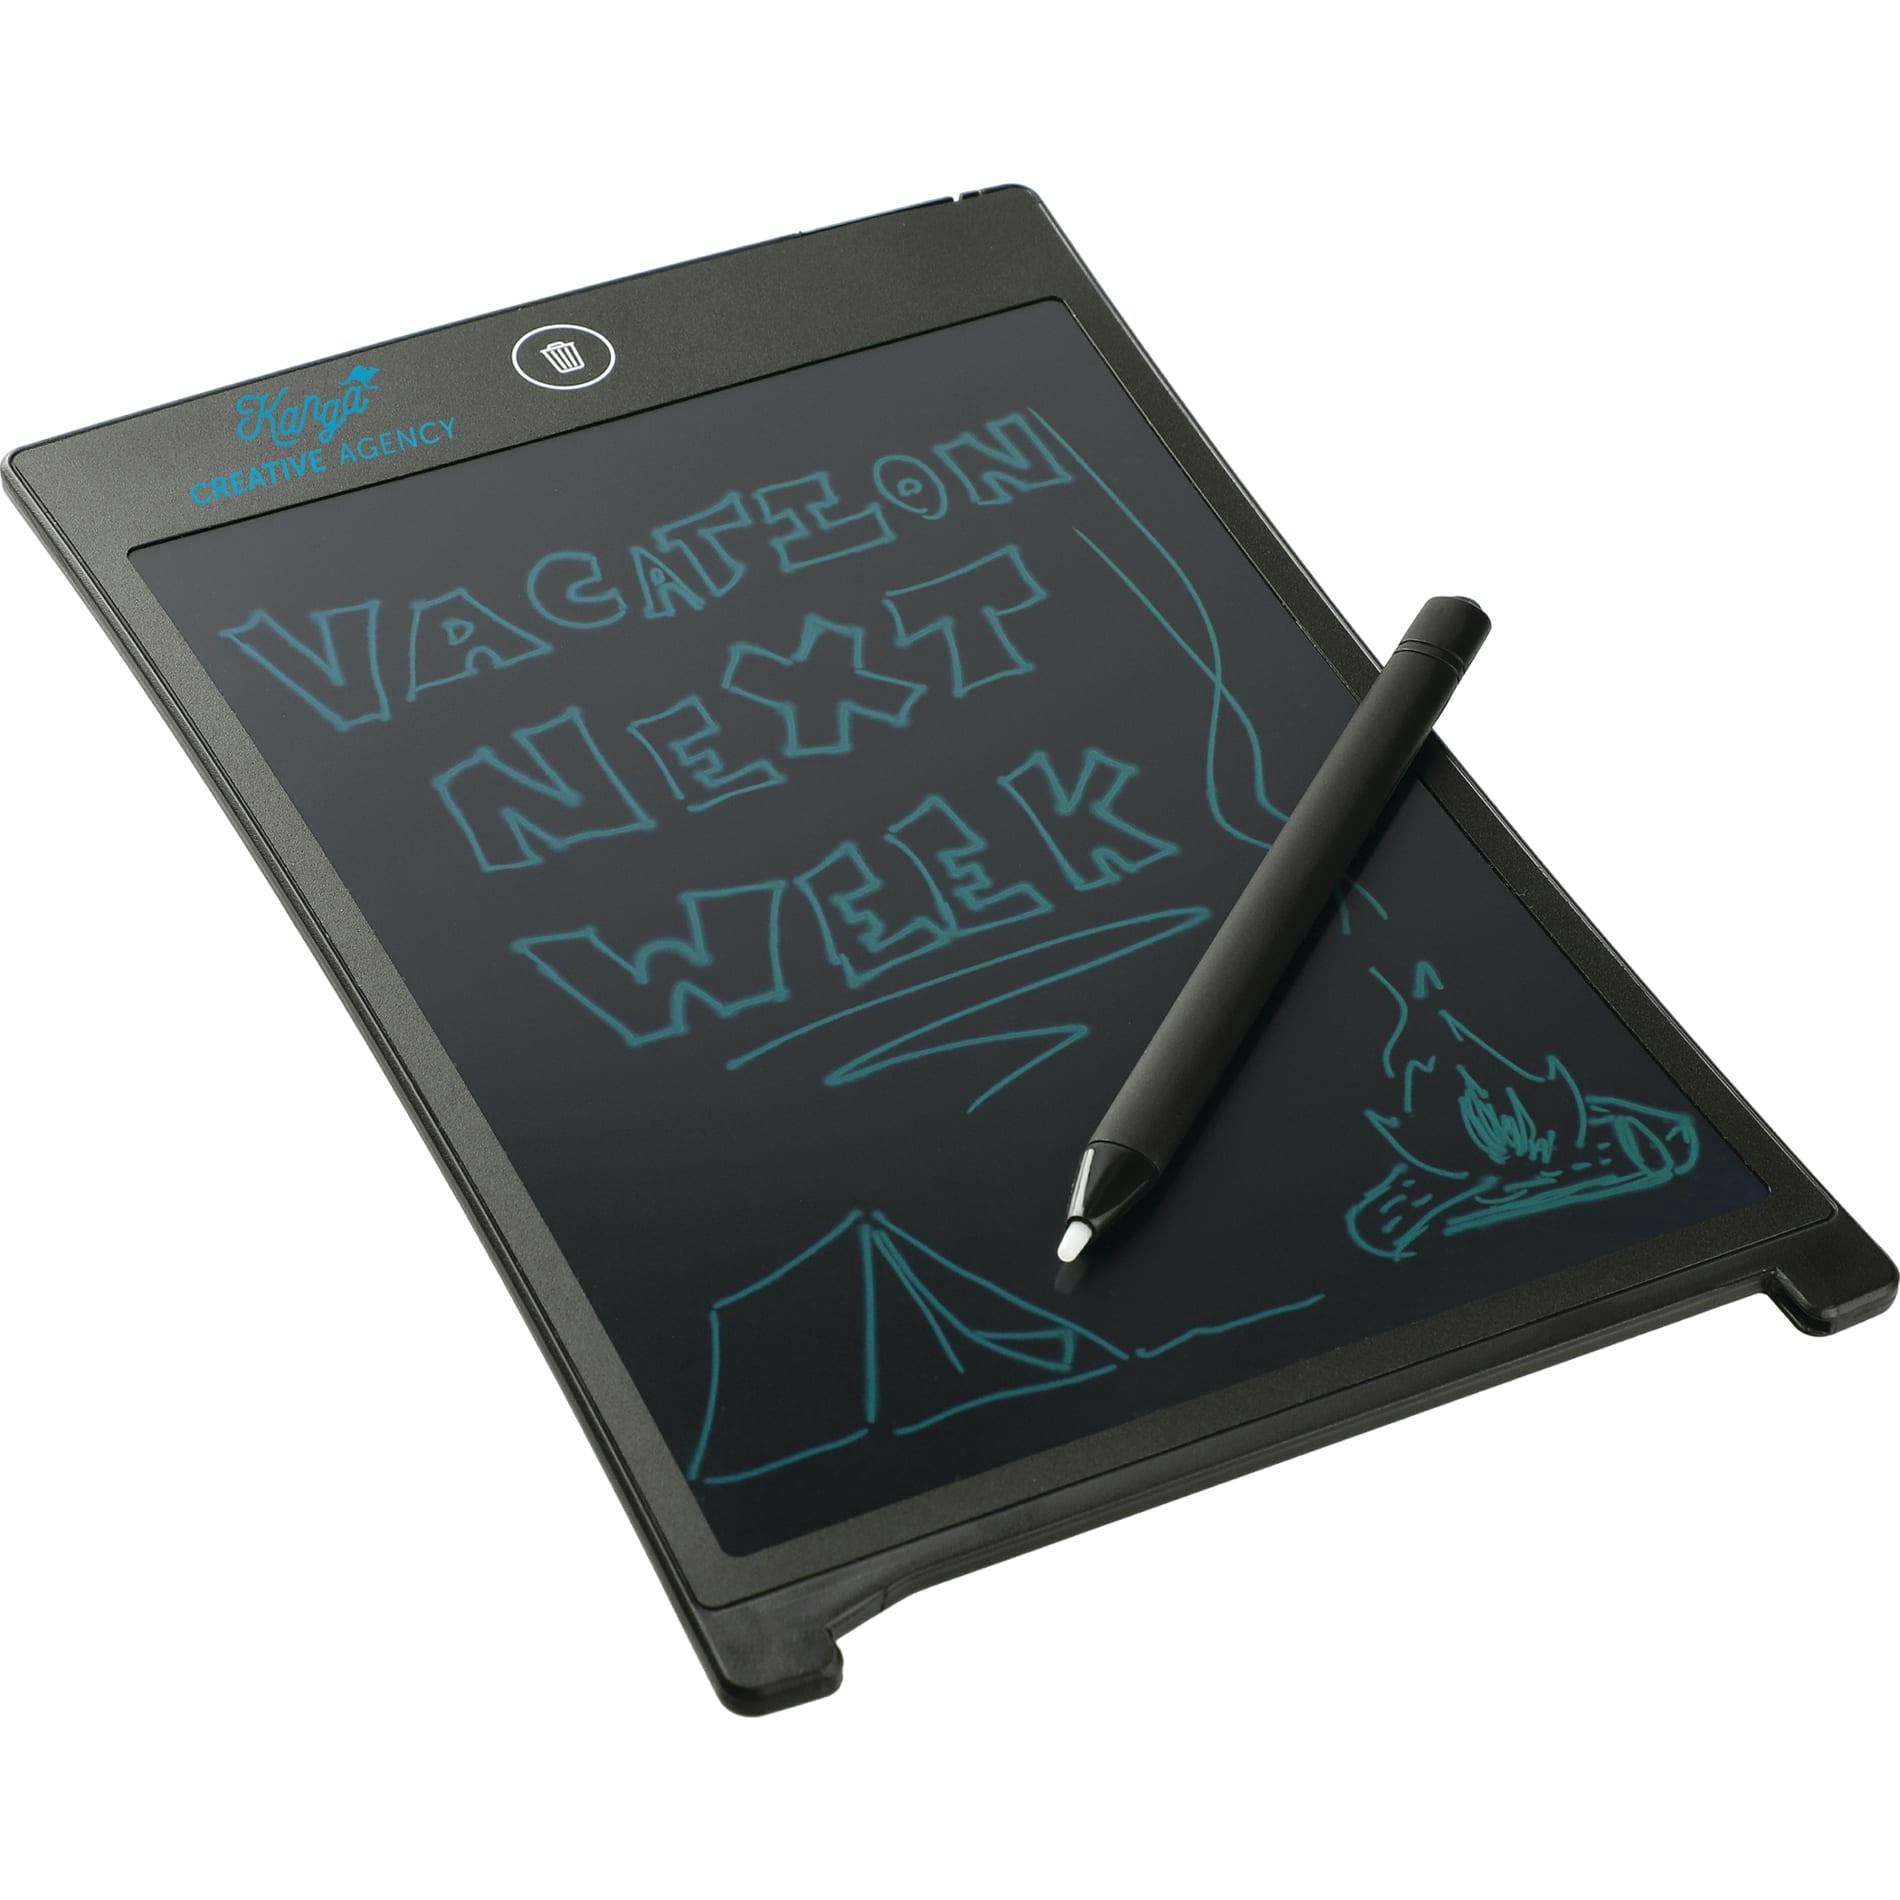 8.5" LCD e-Writing & Drawing Tablet - additional Image 5